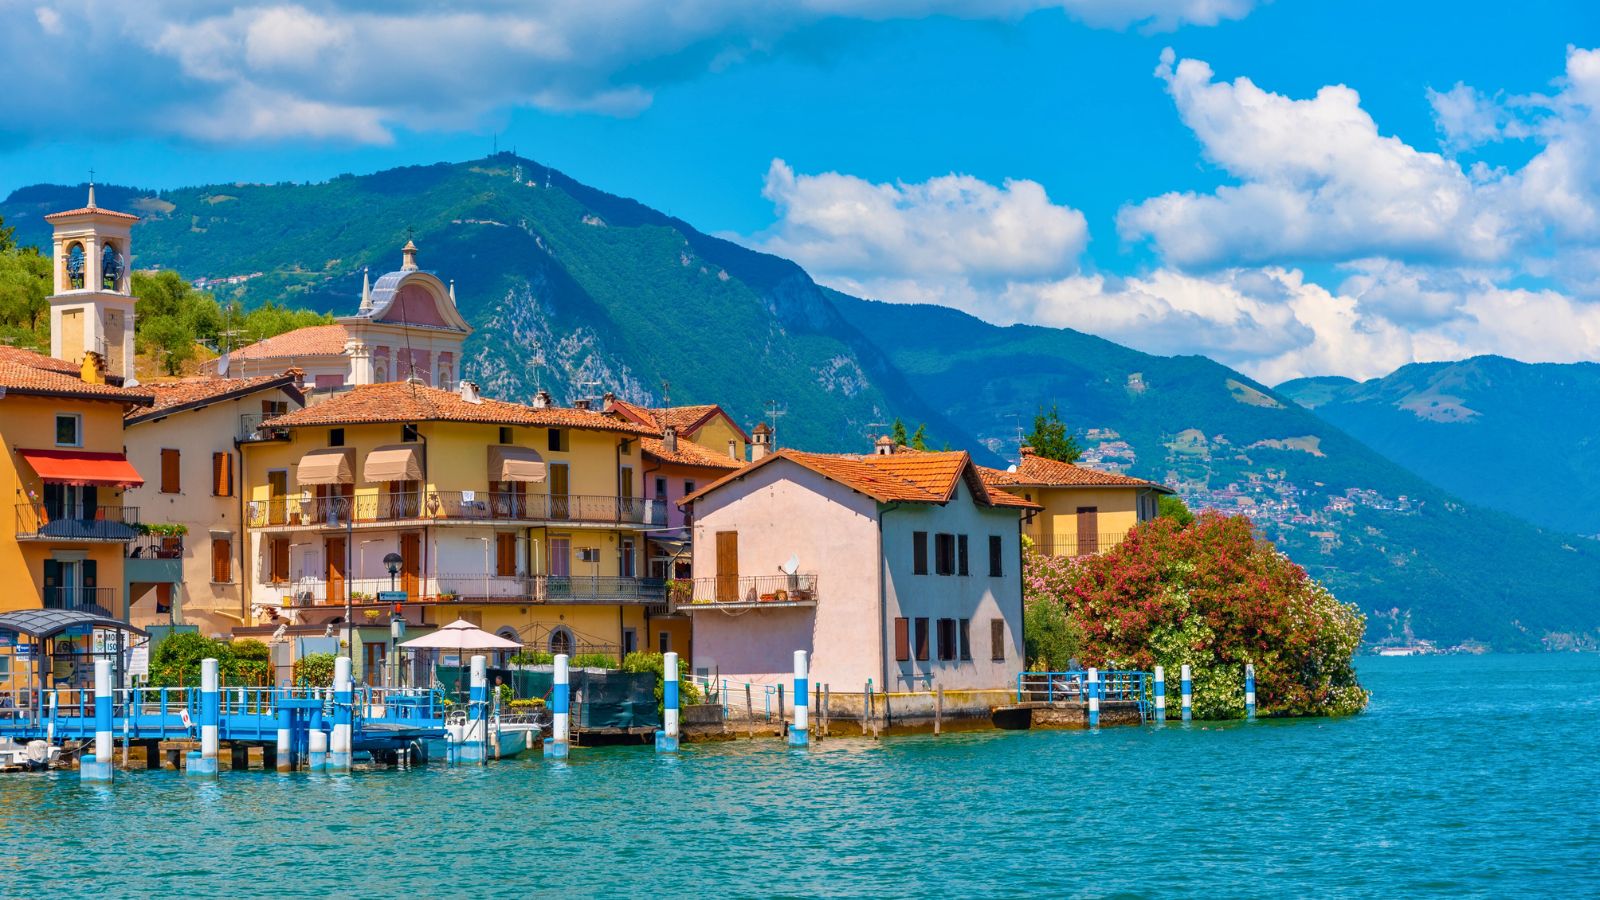 <p><span>Most tourists exploring northern Italy’s lakes flock to Lake Garda or Como. However, between those famous bodies of water is another that’s equally beautiful – and less touristy.</span></p><p><span>Lago d’Iseo (Lake Iseo) is great for cooling off on hot days; mountains surround it, and there’s an island at its center called Monte Isola, which is fun to explore. Throw in its lively lakefront bars and restaurants, and Lago d’Iseo is another hidden gem in Italy.</span></p>